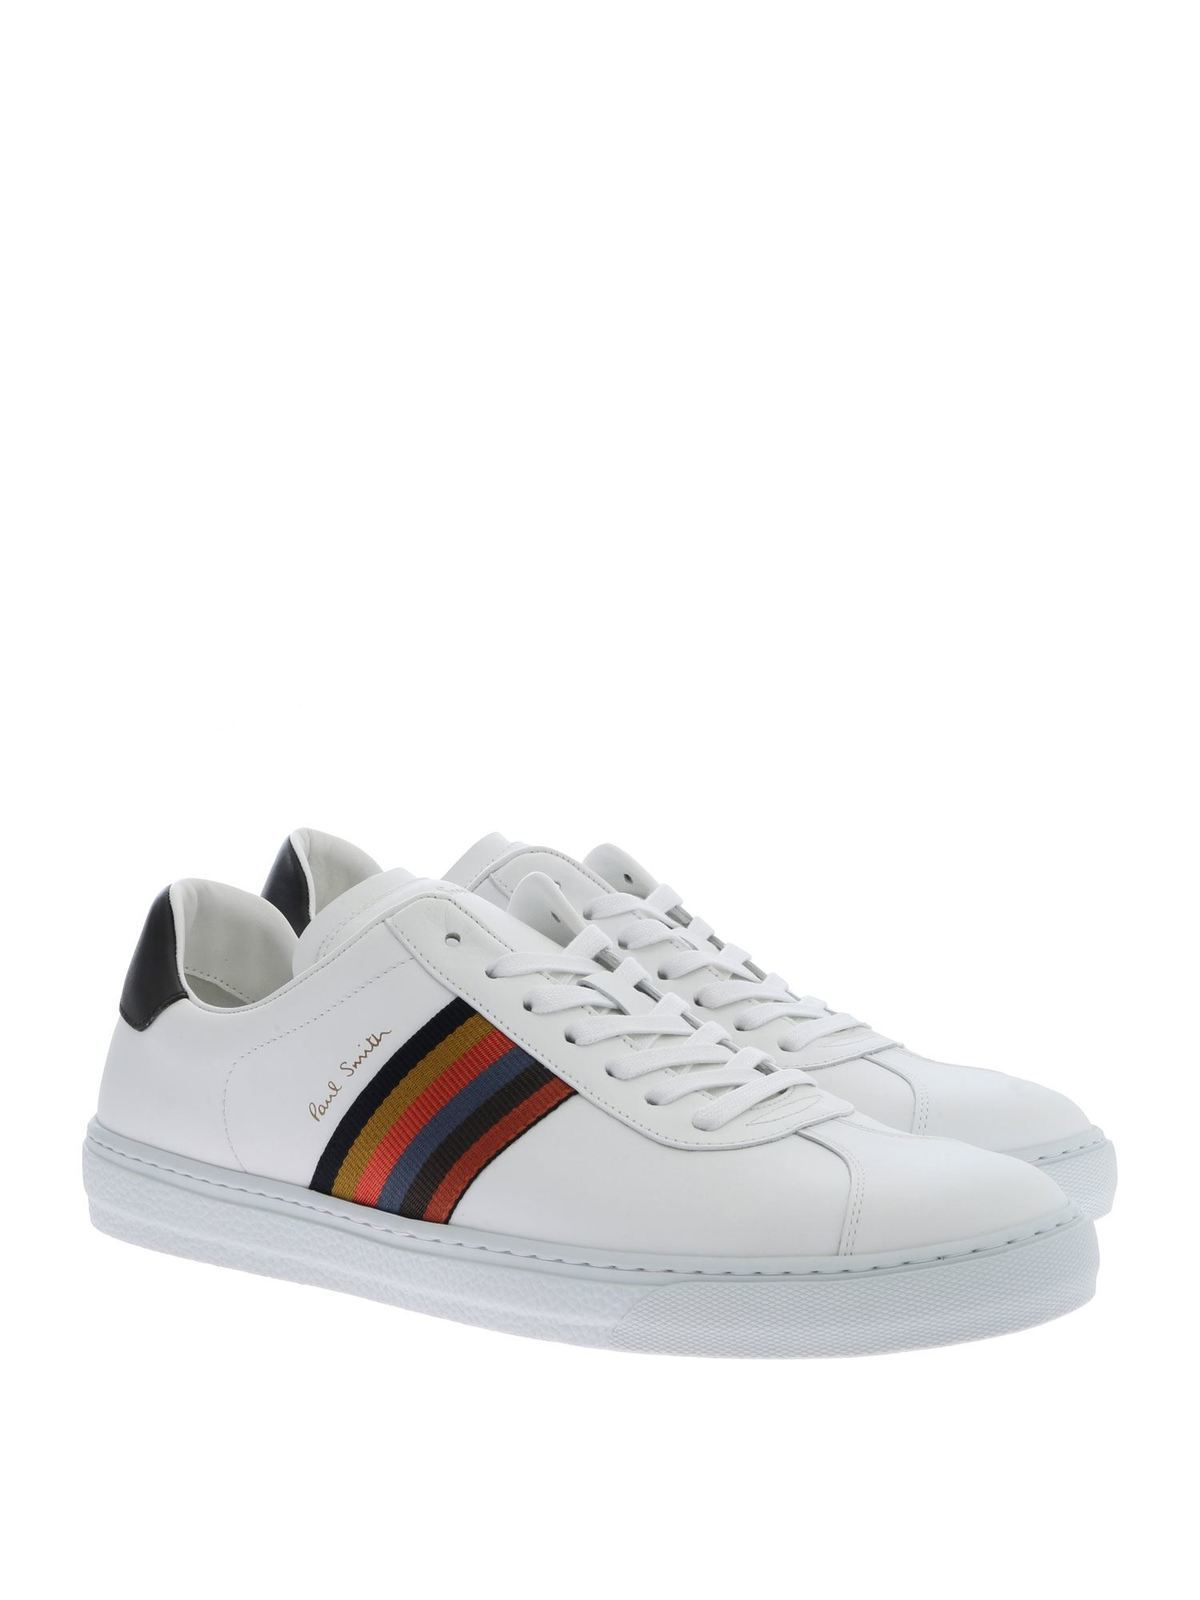 Trainers Paul Smith - White - M1SLEV15AMOLV01